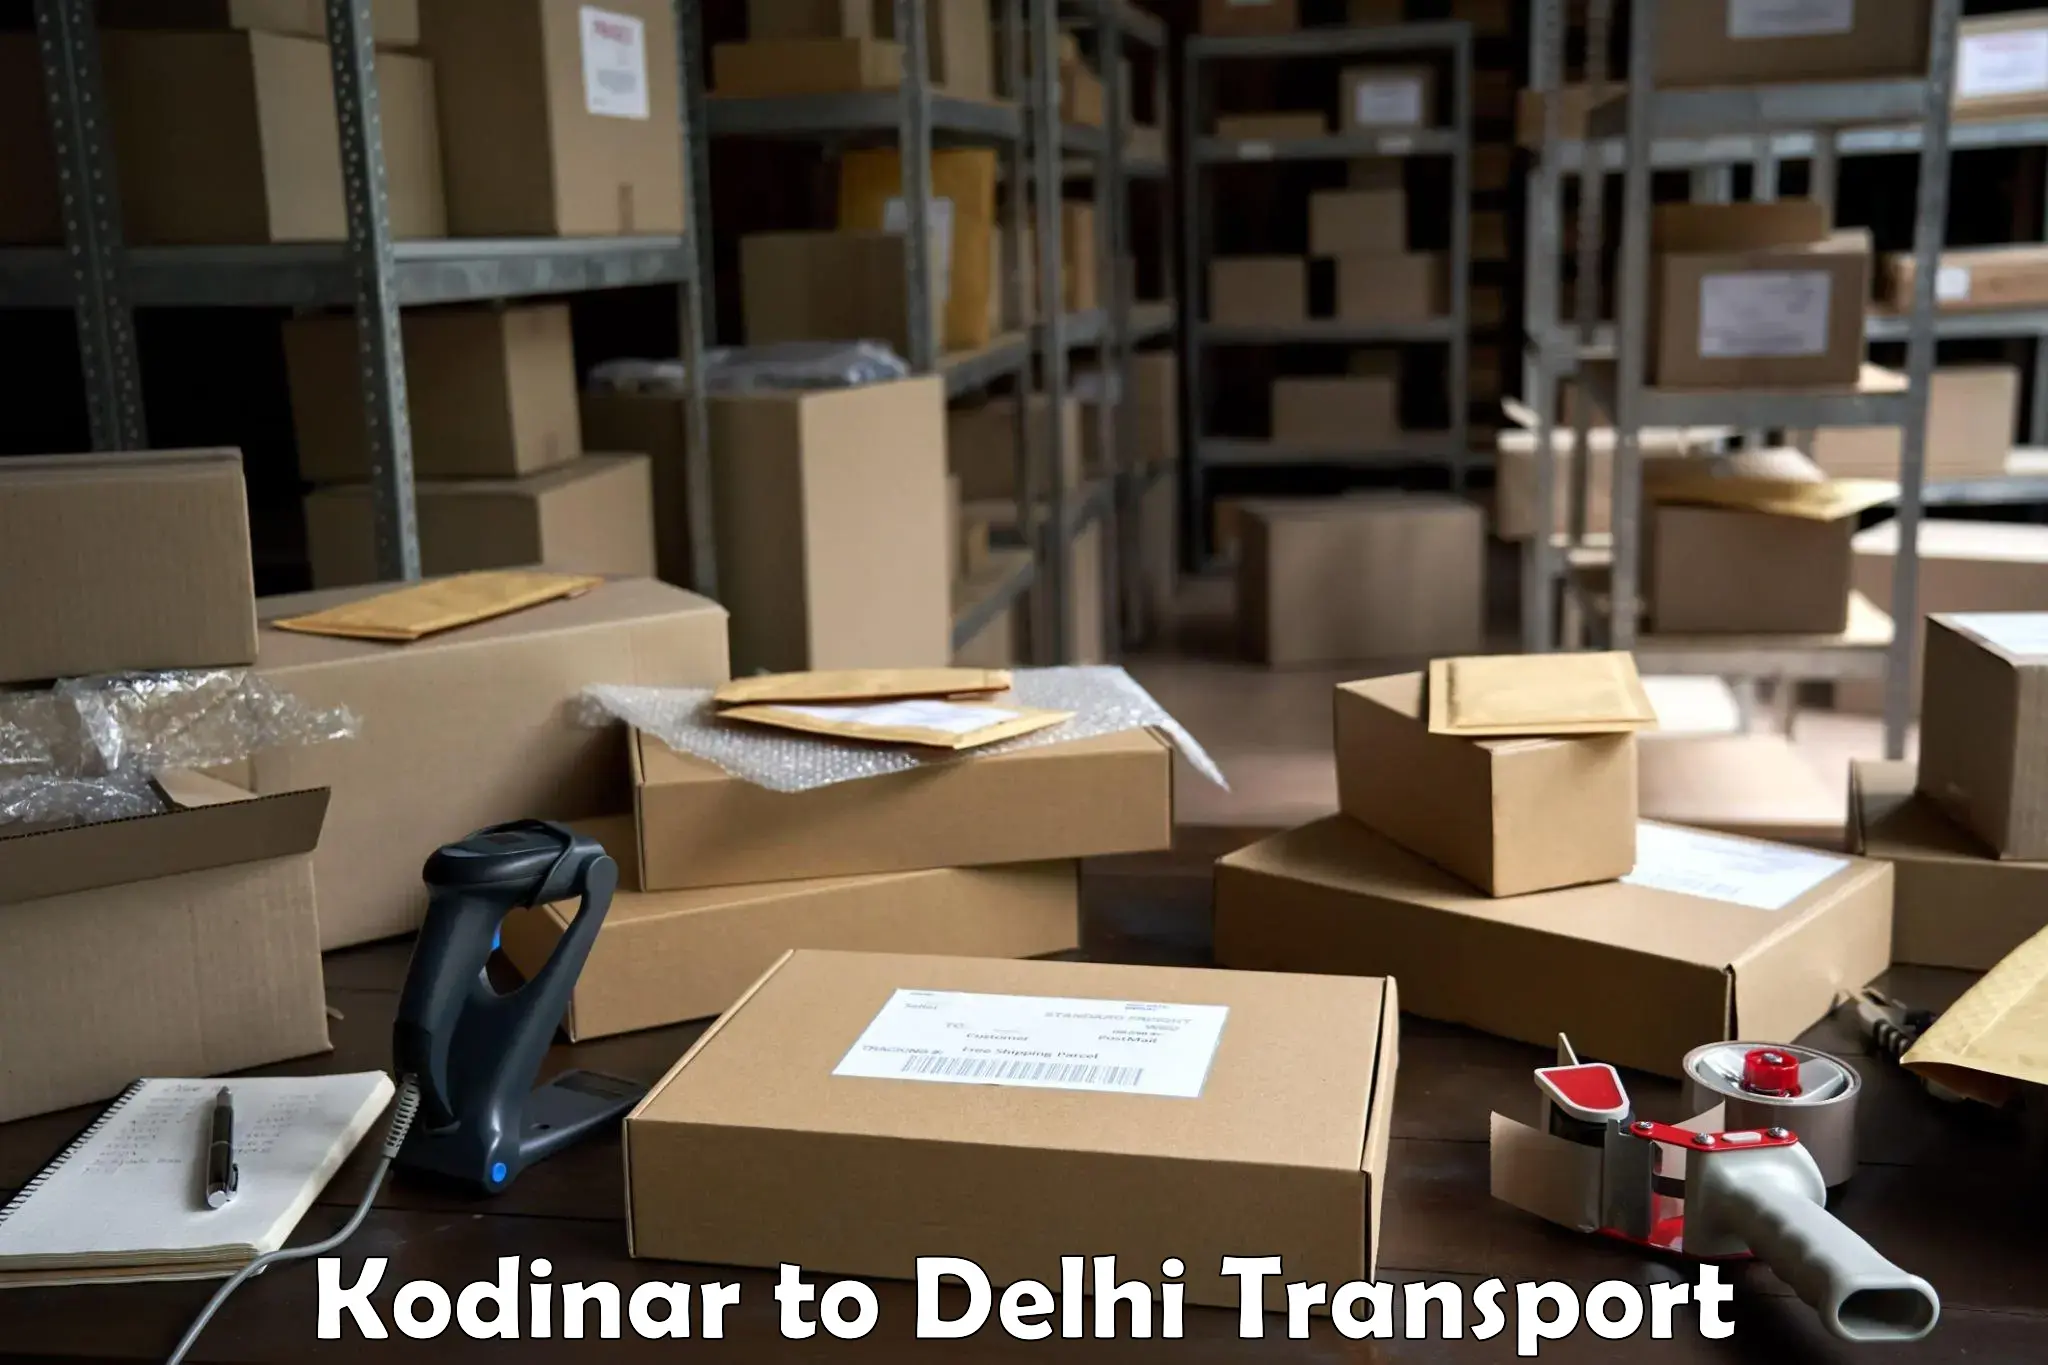 Daily transport service Kodinar to Lodhi Road